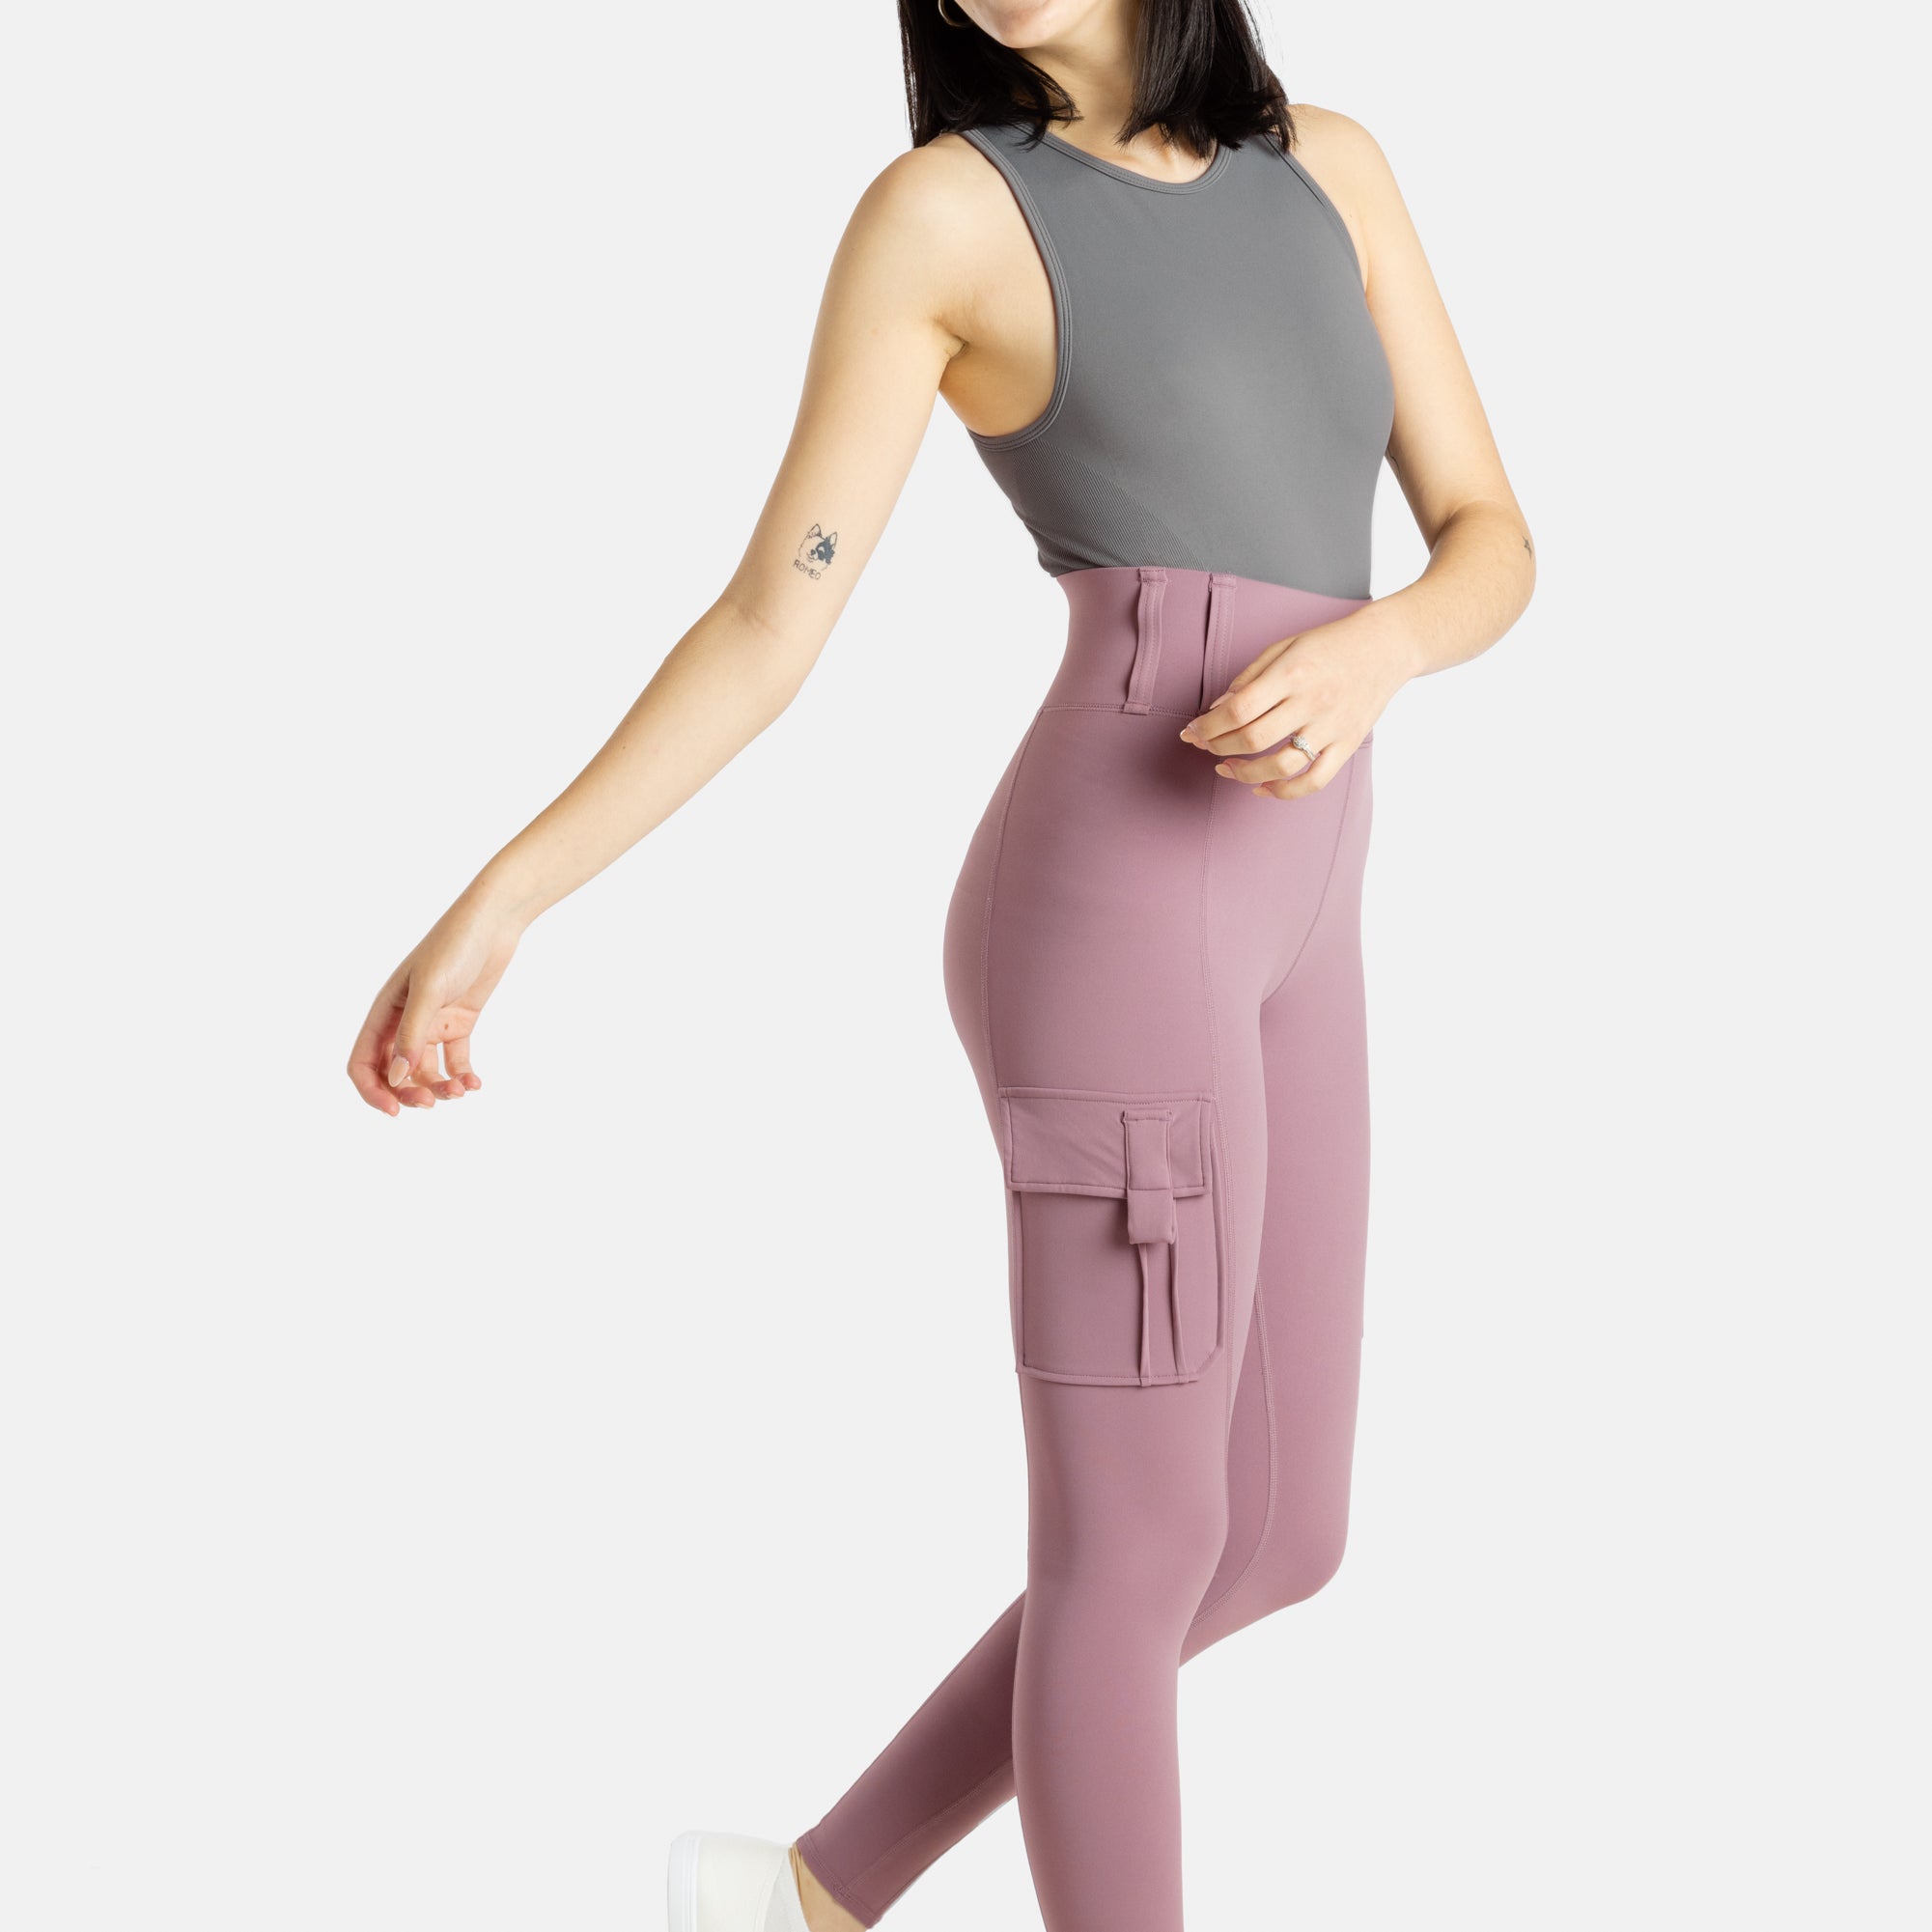 A white woman with long black hair and hoop earrings wears a charcoal tank top and mauve (Pinkish lavender) leggings.